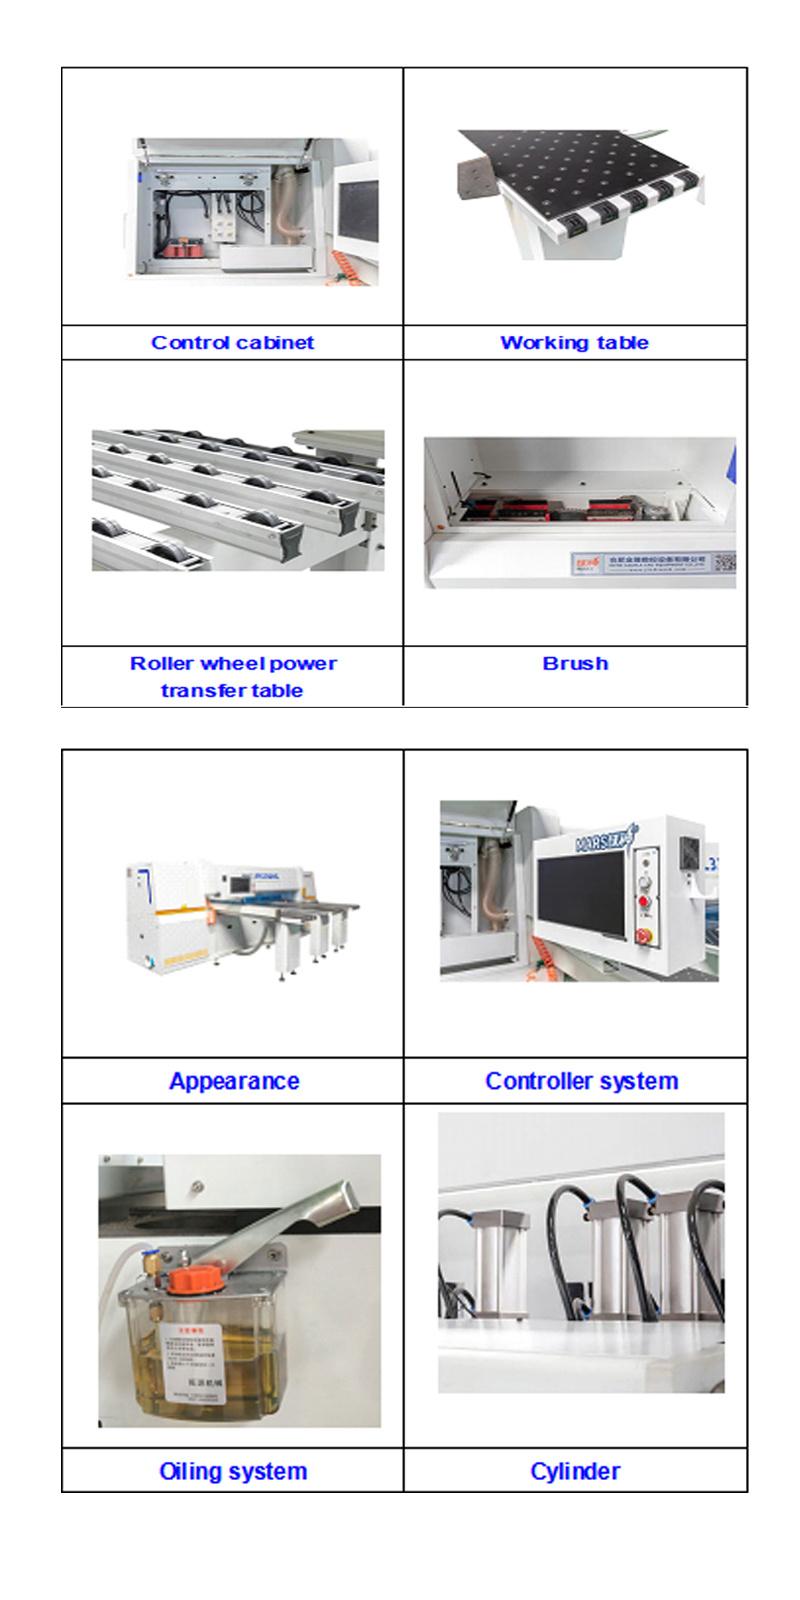 Mars HPL330hg Computer Control Full Automatic Electronic Wood Panel Saw Cutting Machine with Optimizer